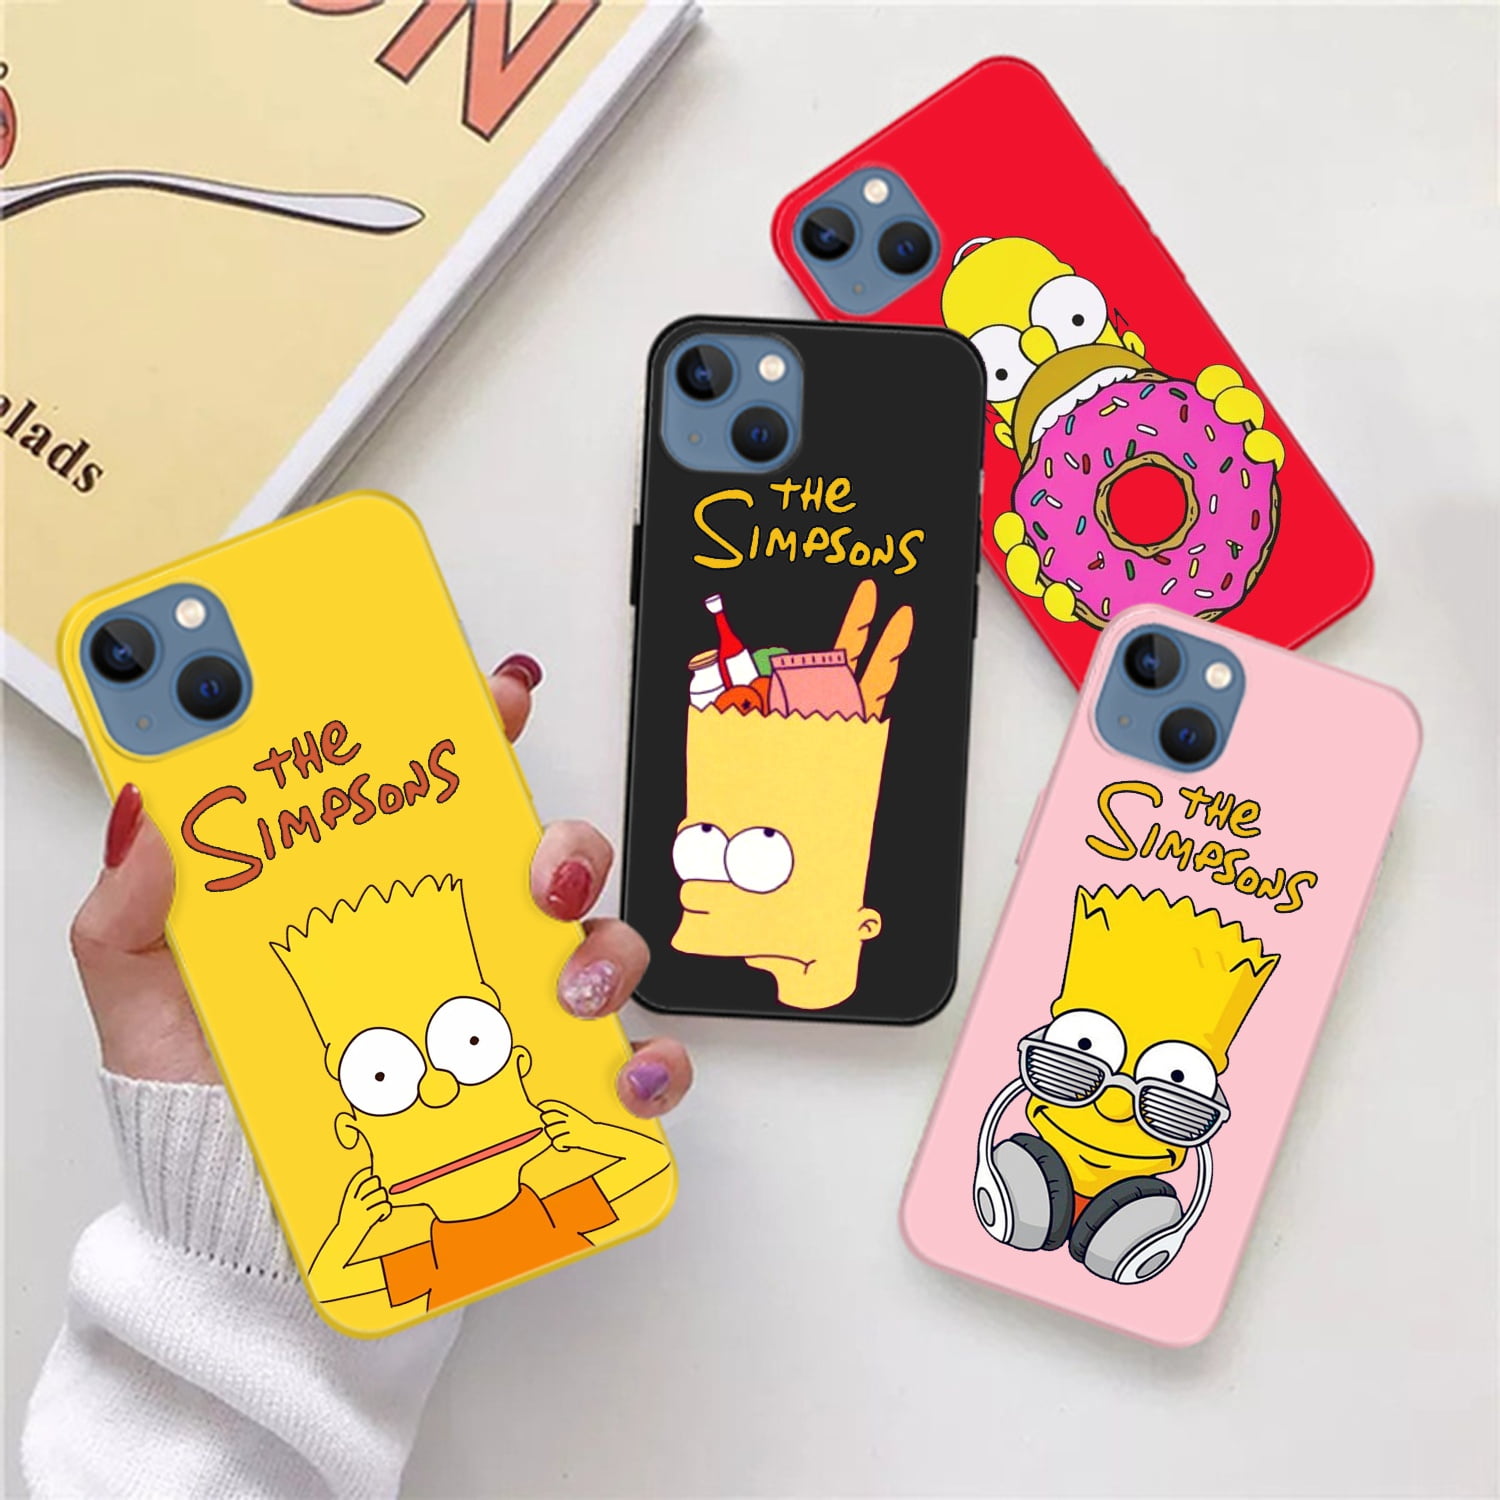 Cute Cartoon Cat Silicone Case for Coque iPhone 5 5S SE 6 6S 7 8 Plus XS Max XR X Phone Soft TPU Back Cover,3,for iPhone X XS